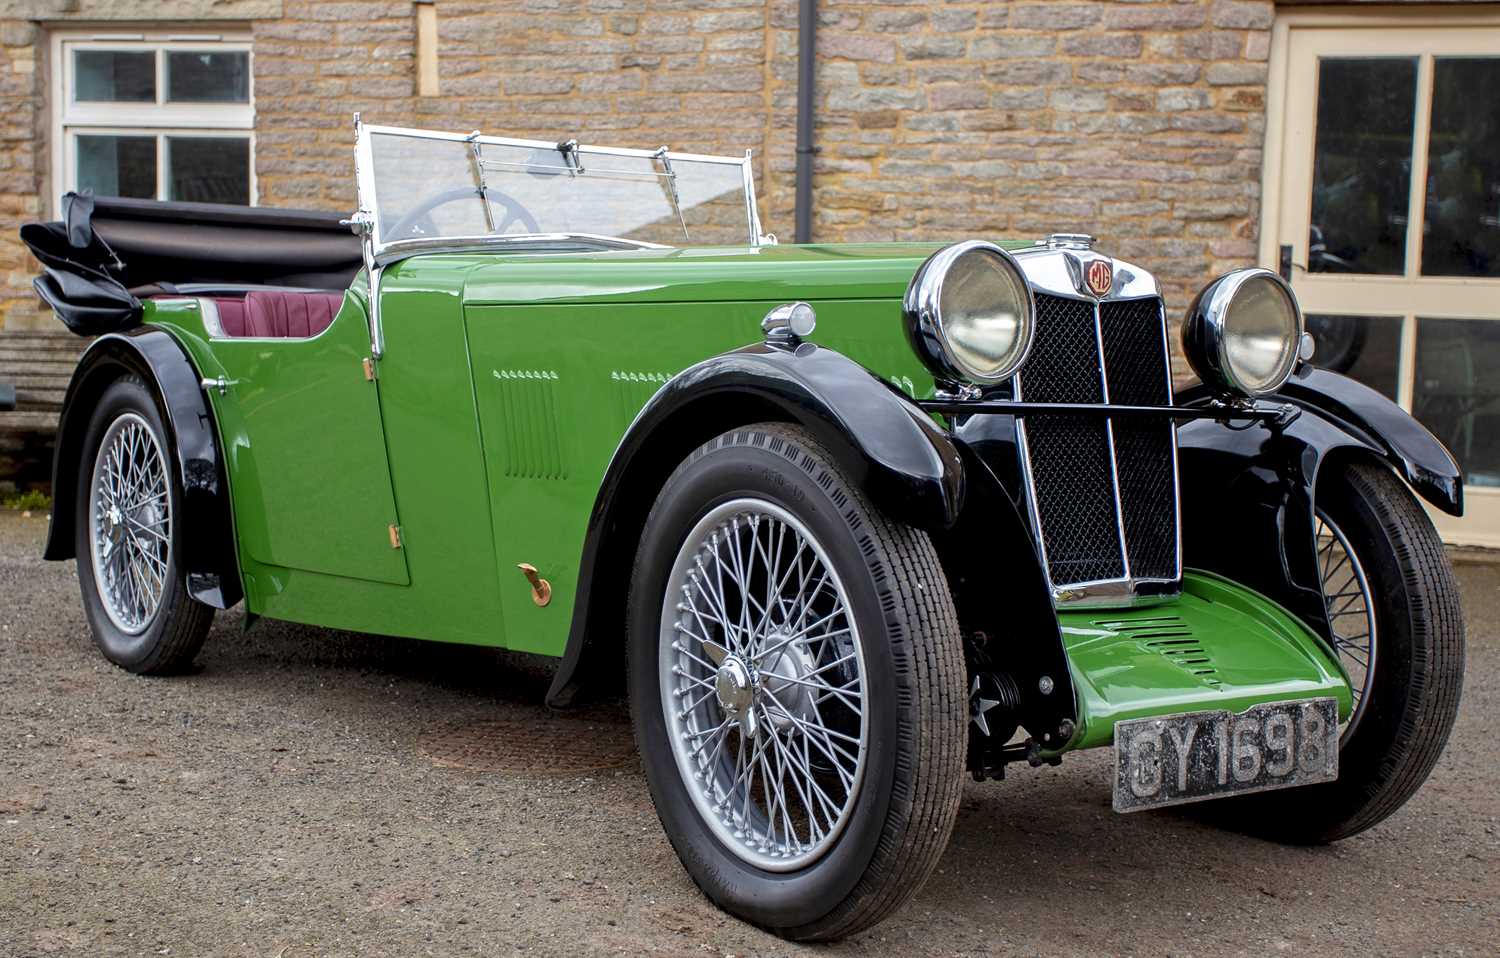 A 1932 MG F-Type Magna, GY 1698, converted from a two seater to a four seater and fully restored.